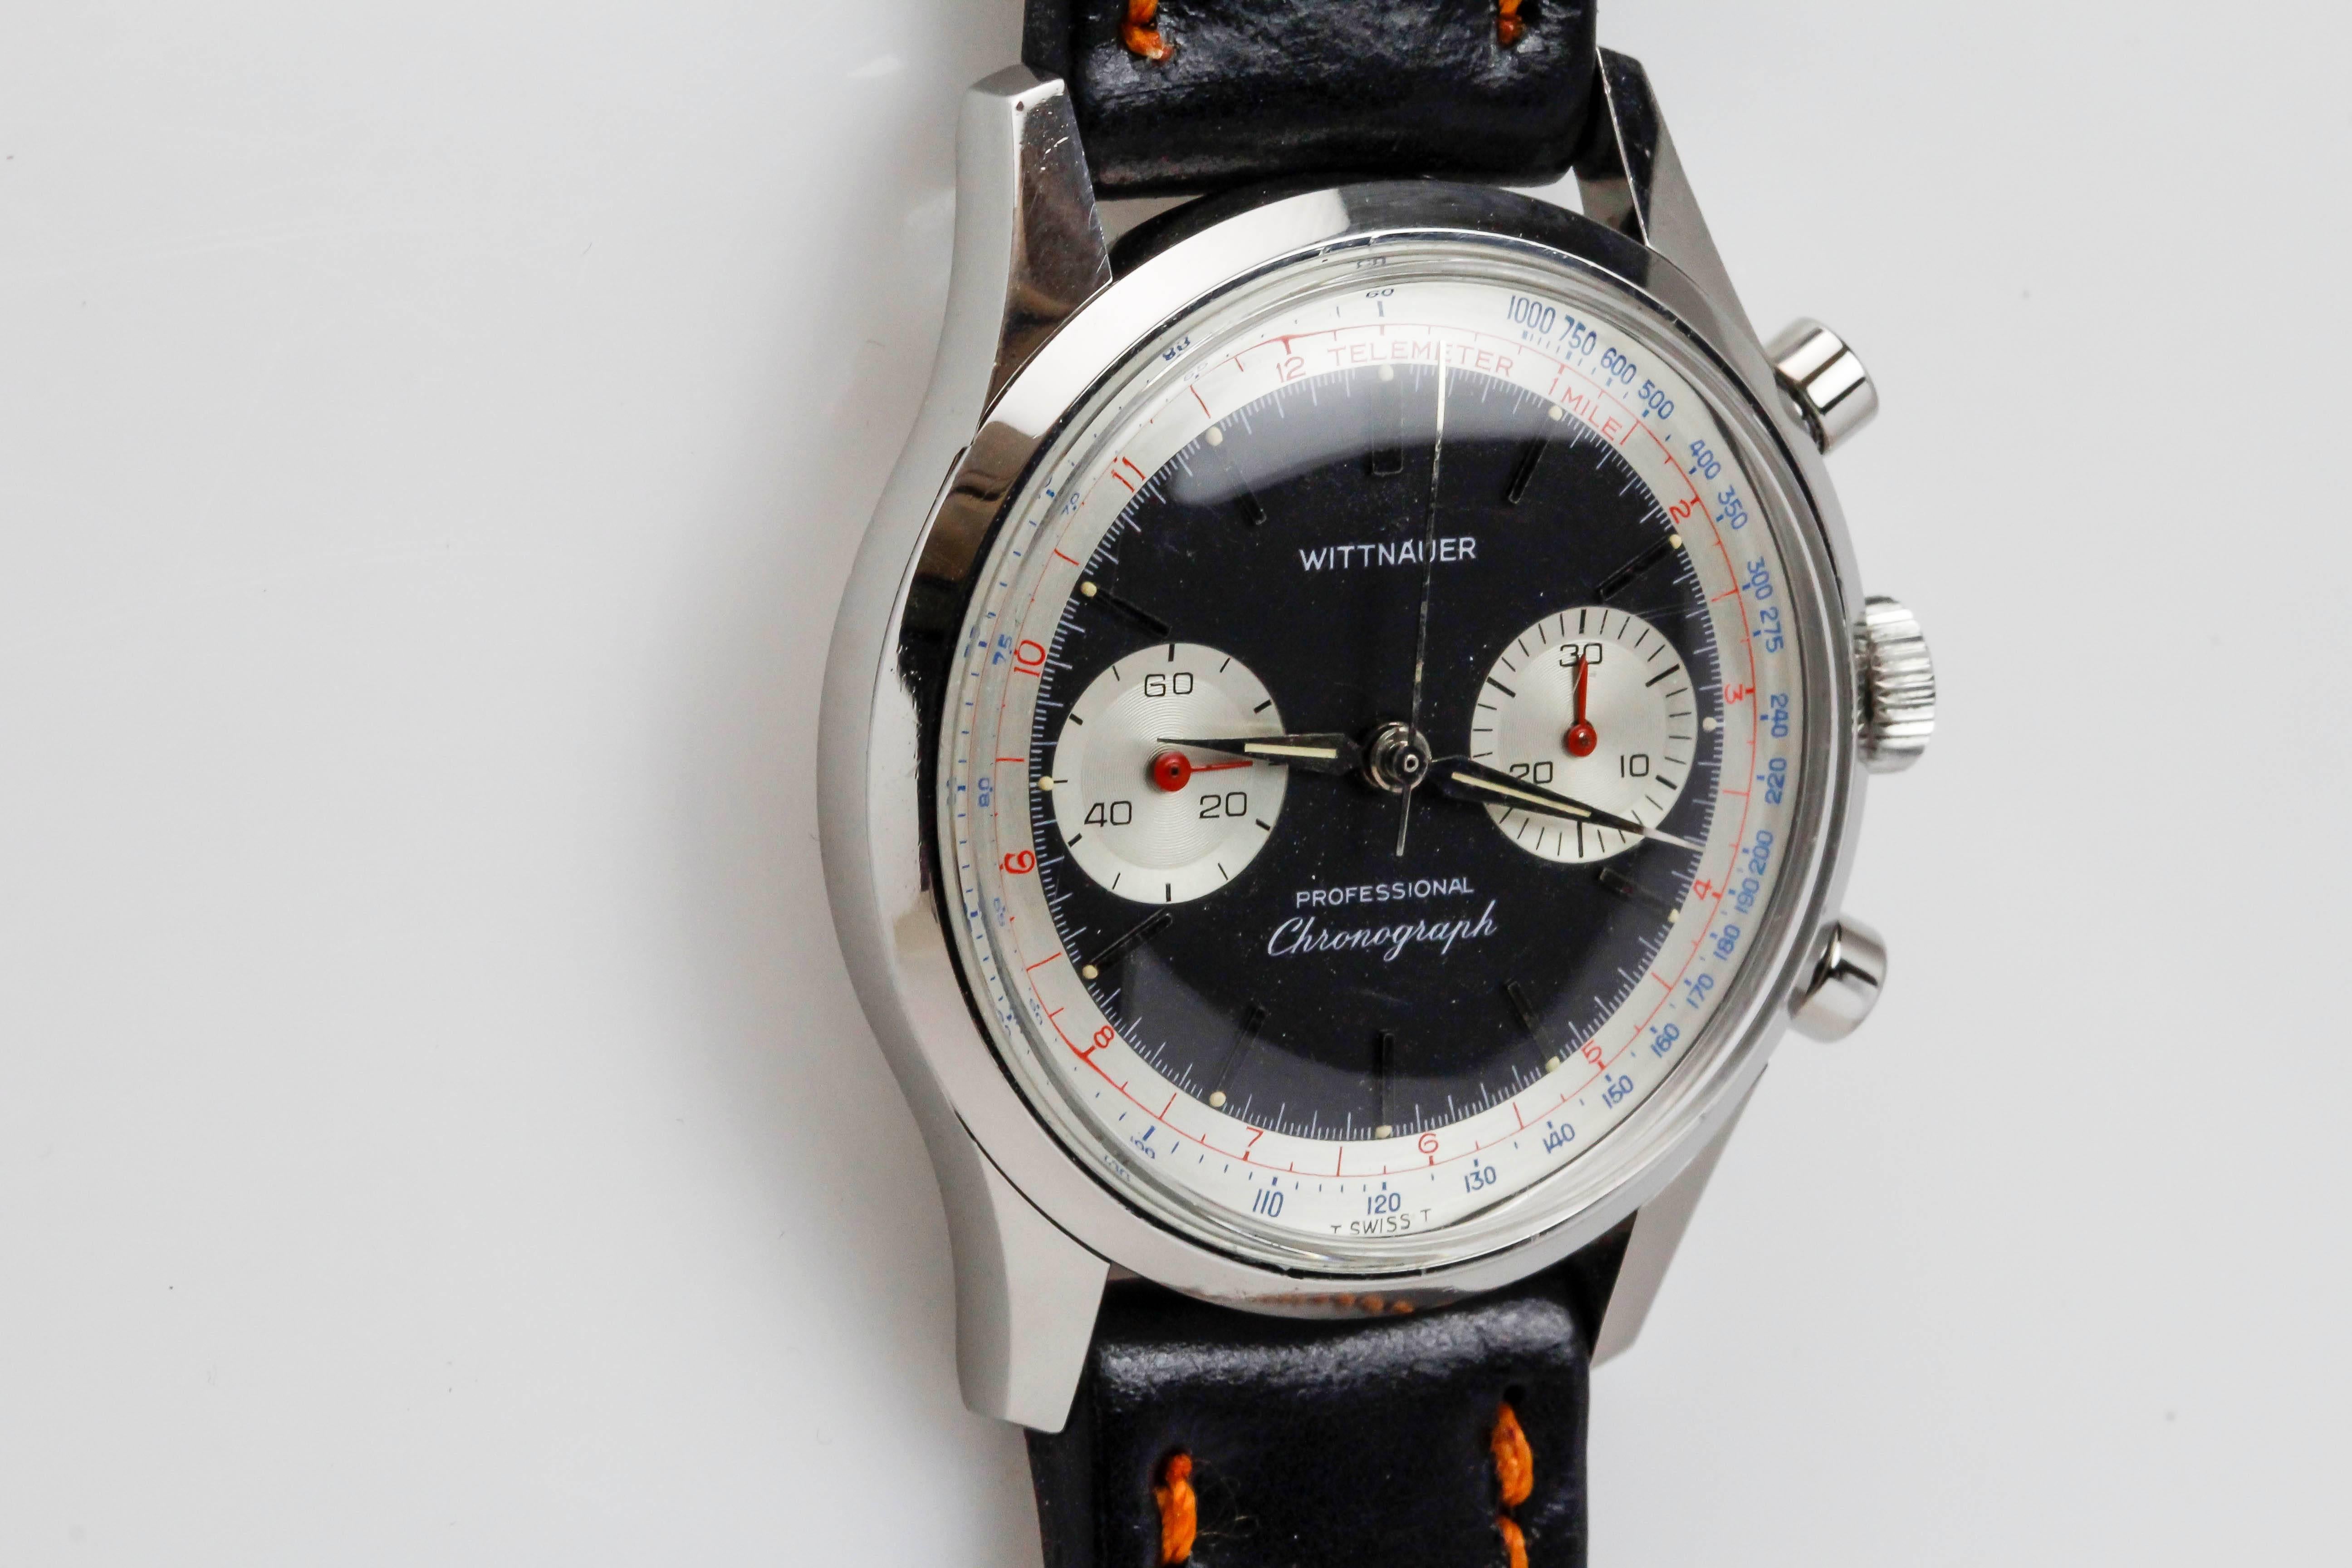 Wittnauer Stainless Steel Professional Chronograph Wristwatch c. 1960's 2